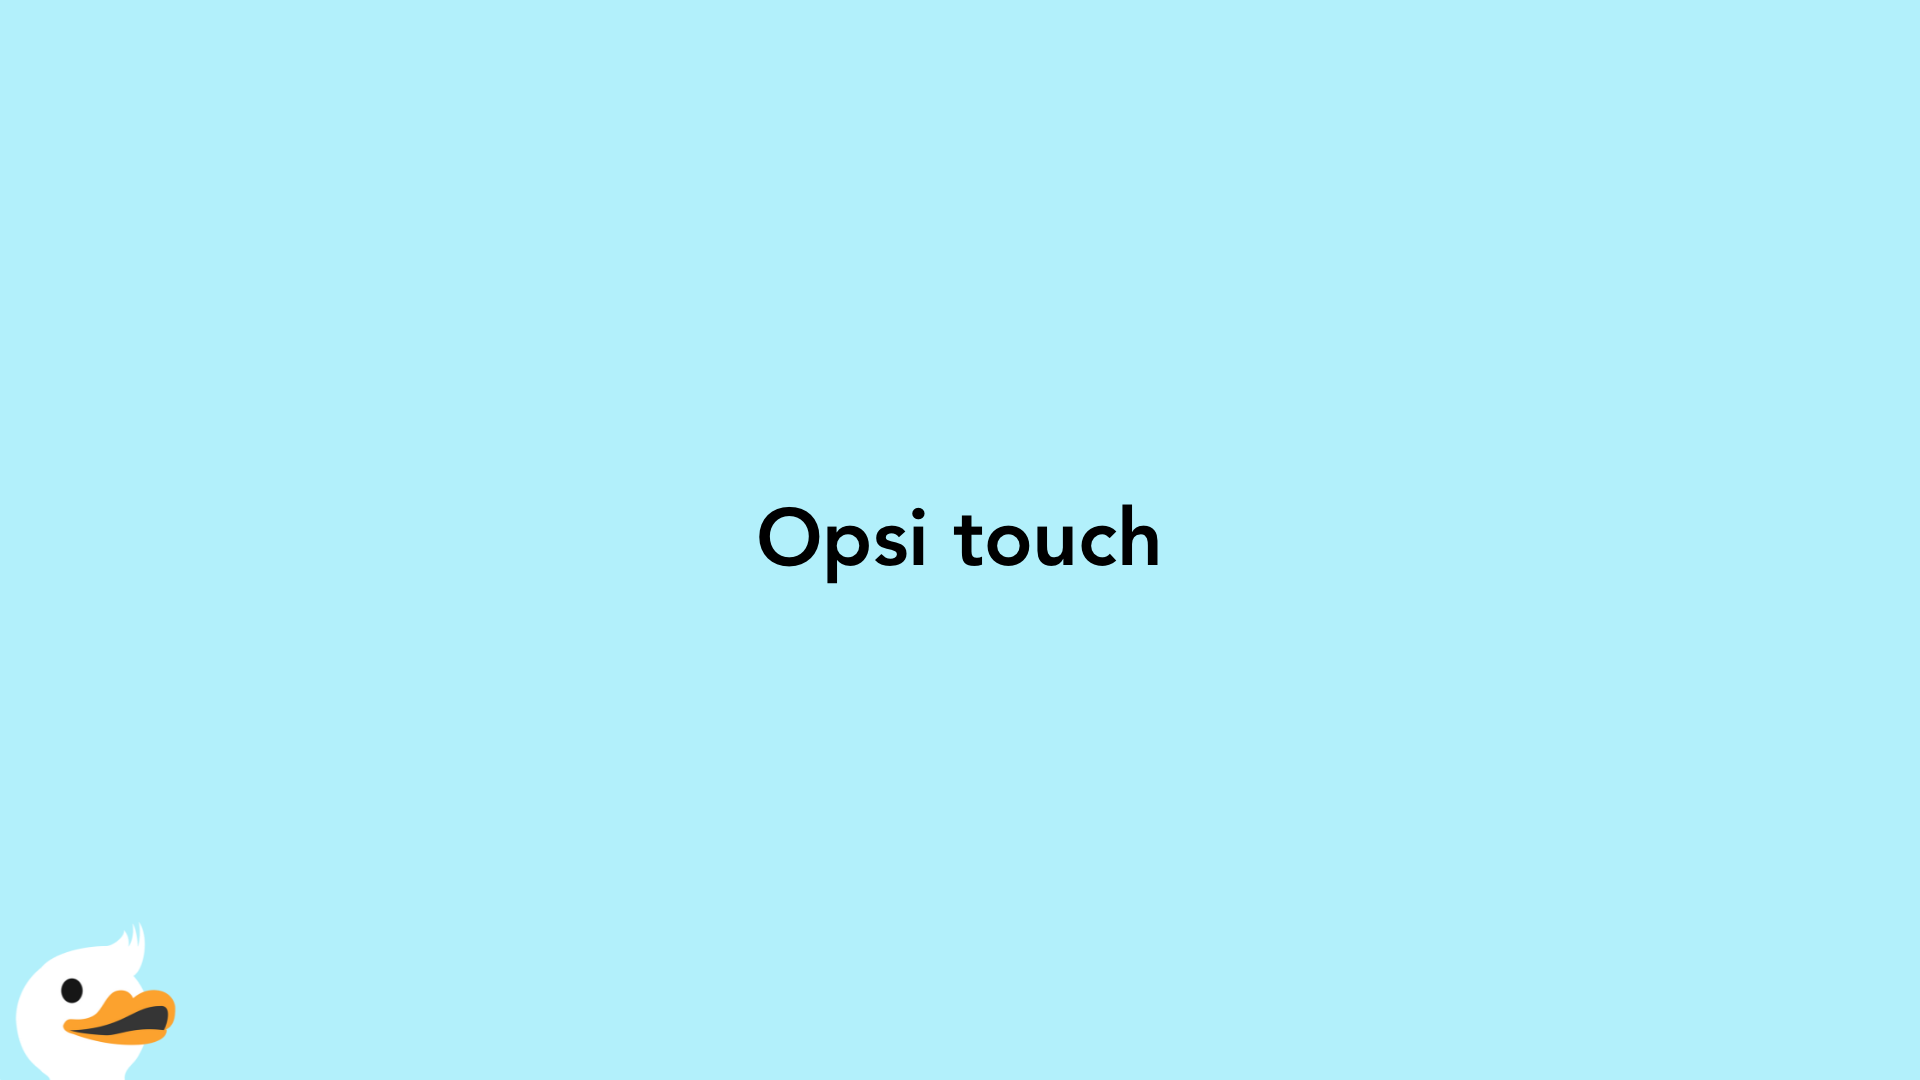 Opsi touch